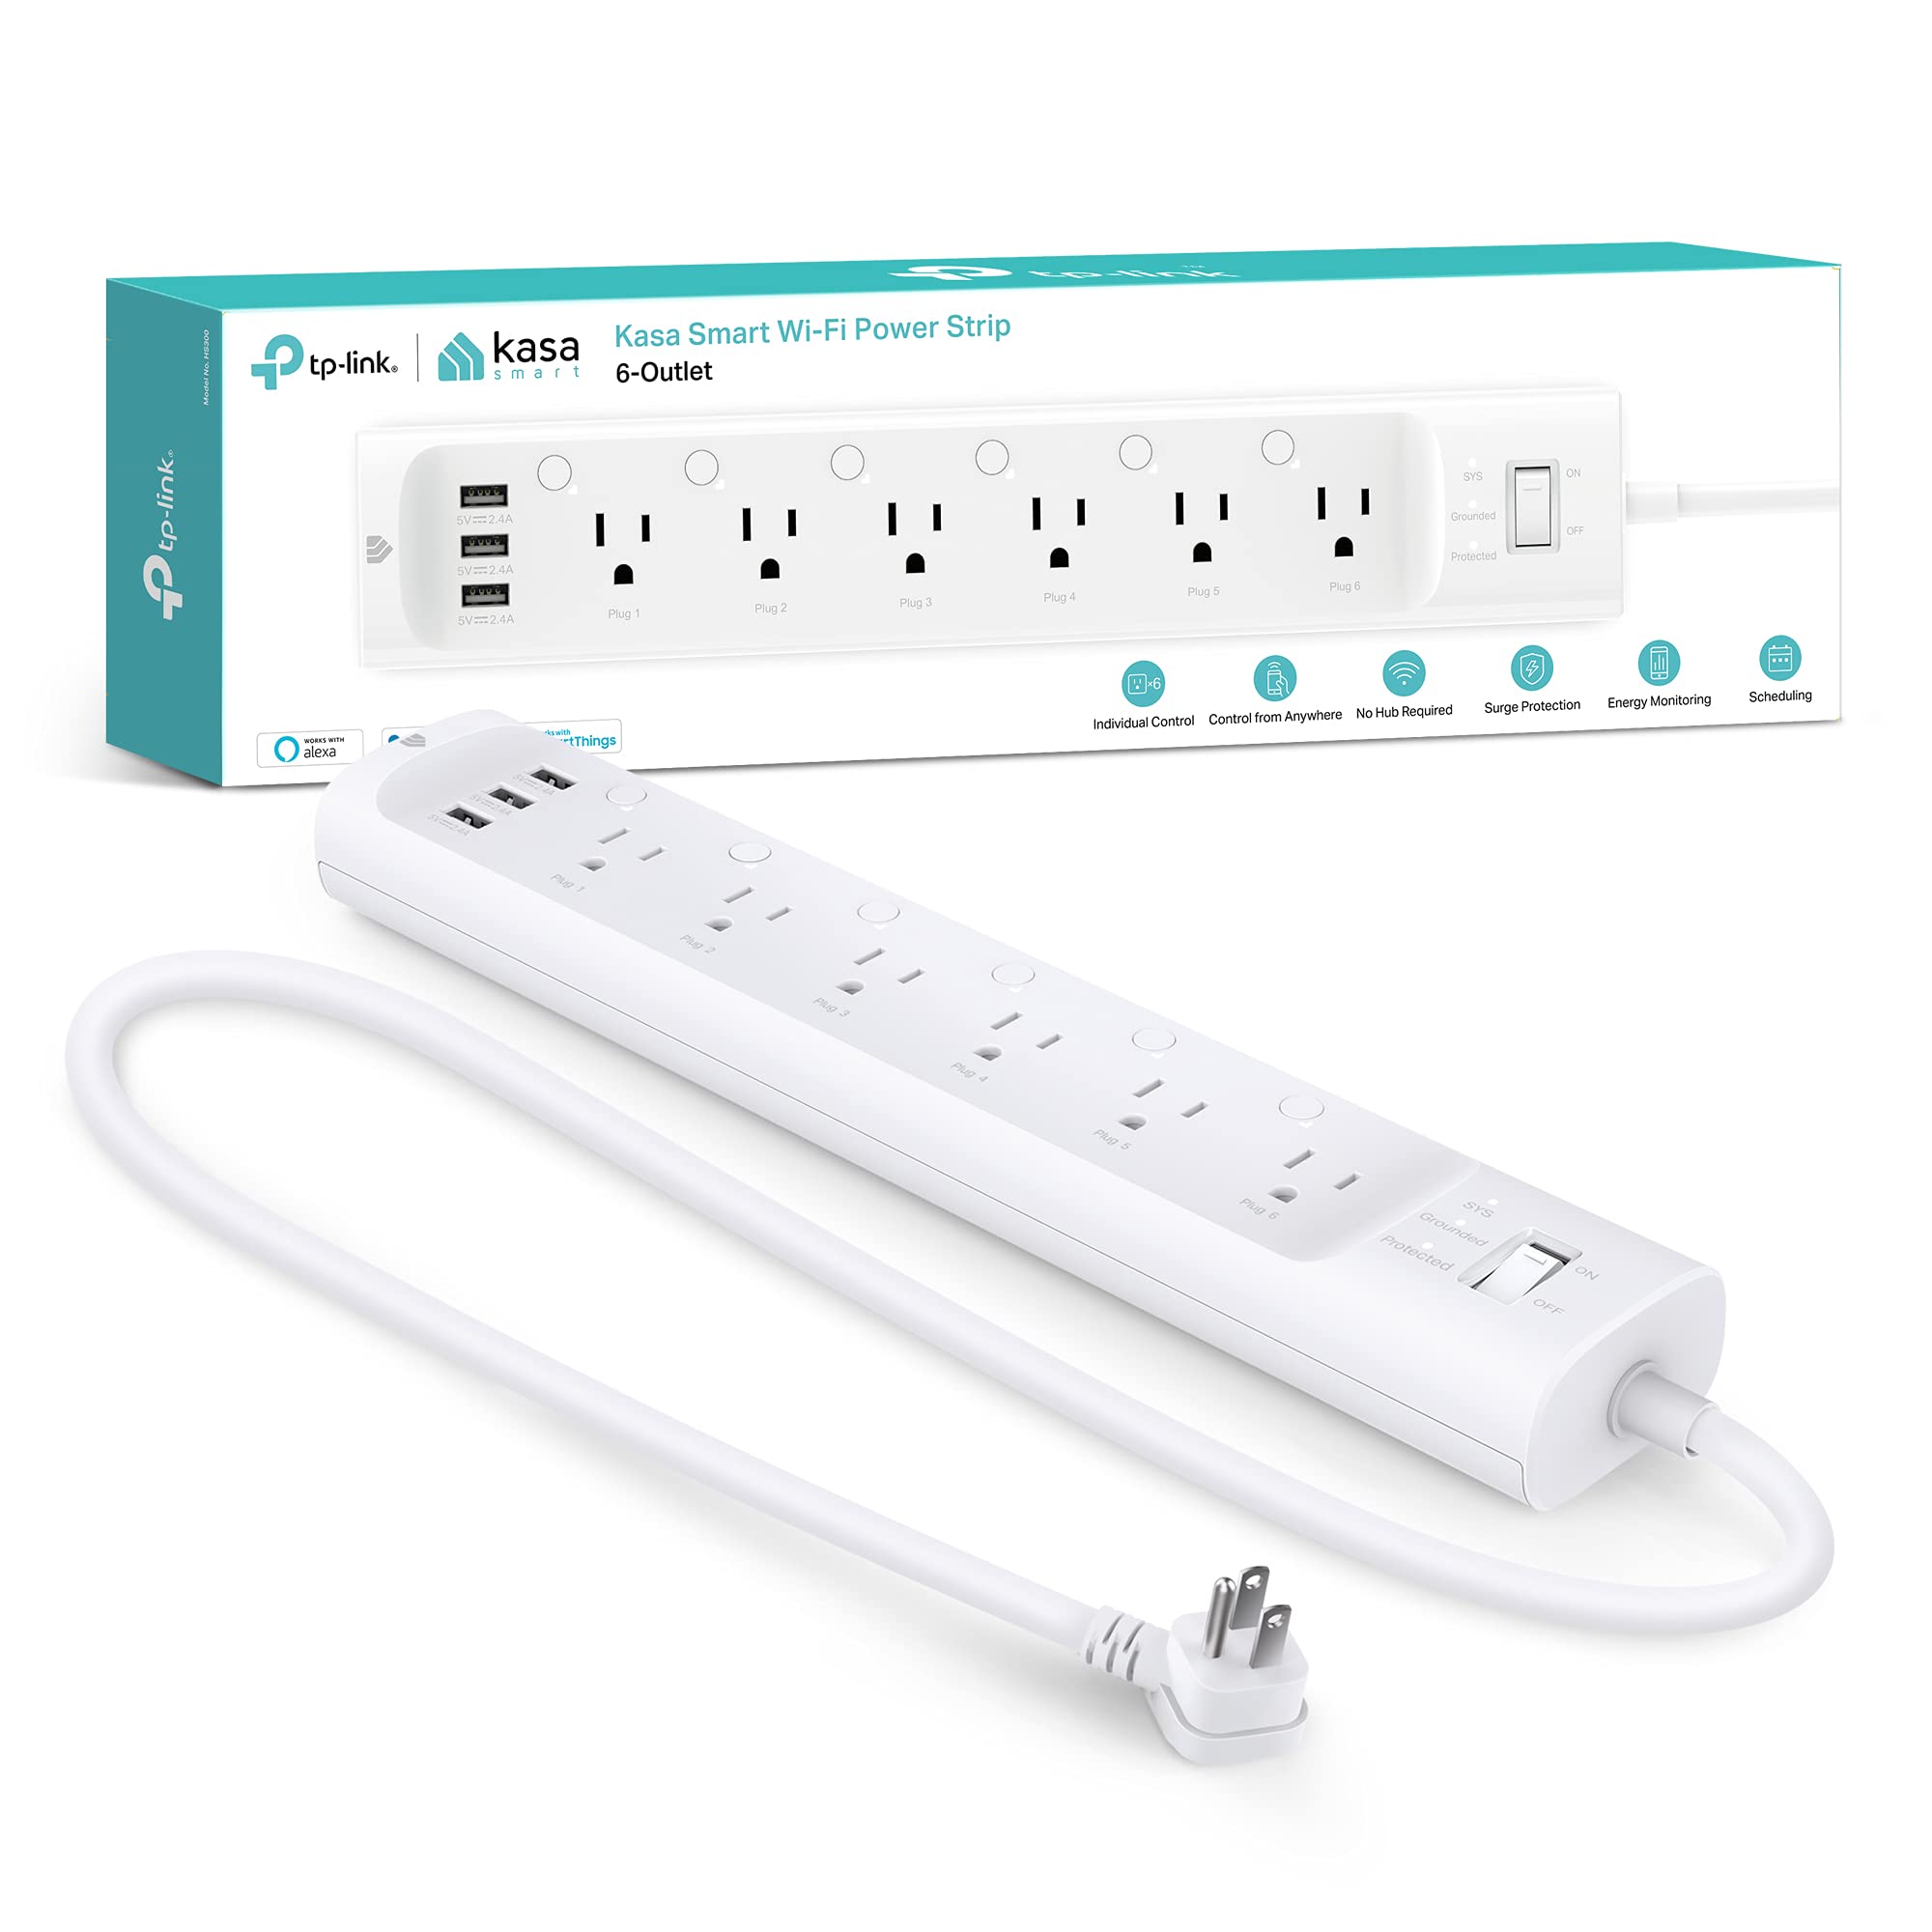 Kasa Smart Plug Power Strip HS300, Surge Protector with 6 Individually Controlled Smart Outlets and 3 USB Ports, Works with Alexa & Google Home, No Hub Required , White $44.99